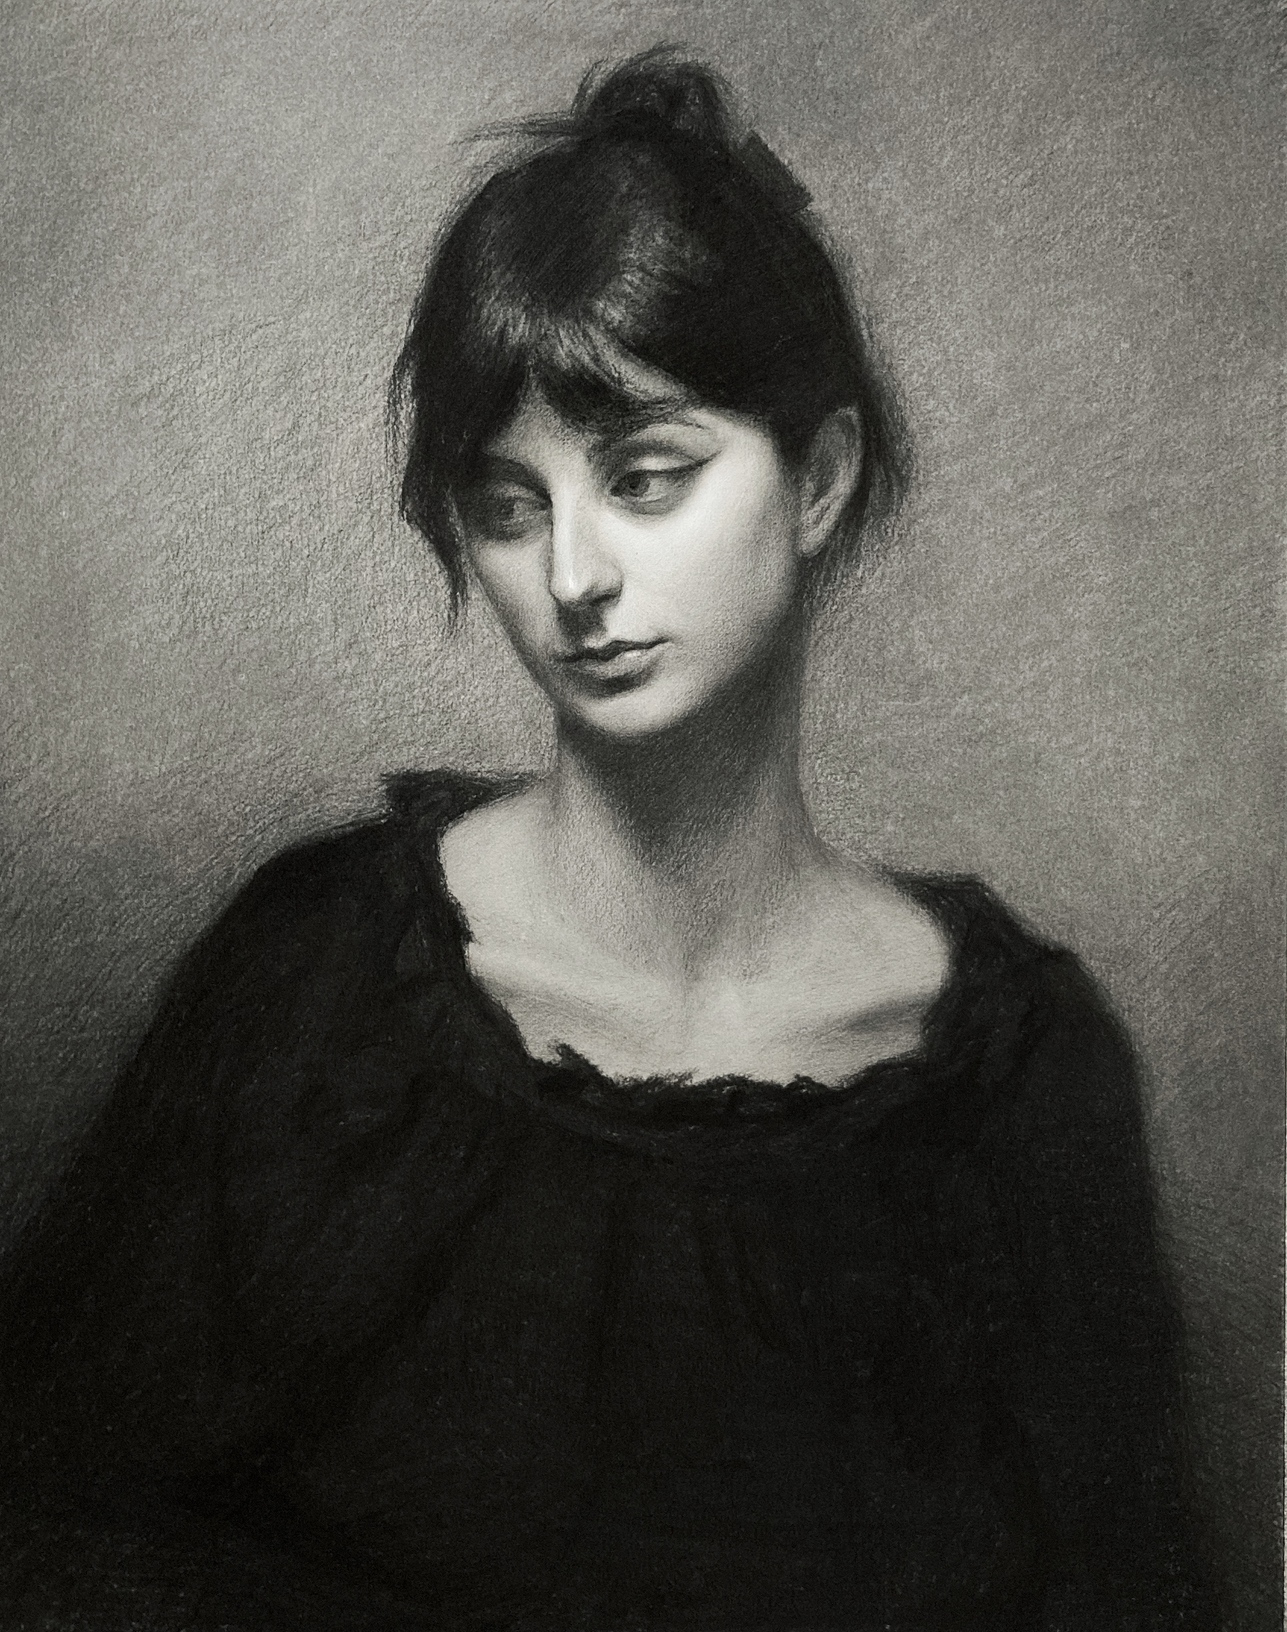 Charcoal drawing 15